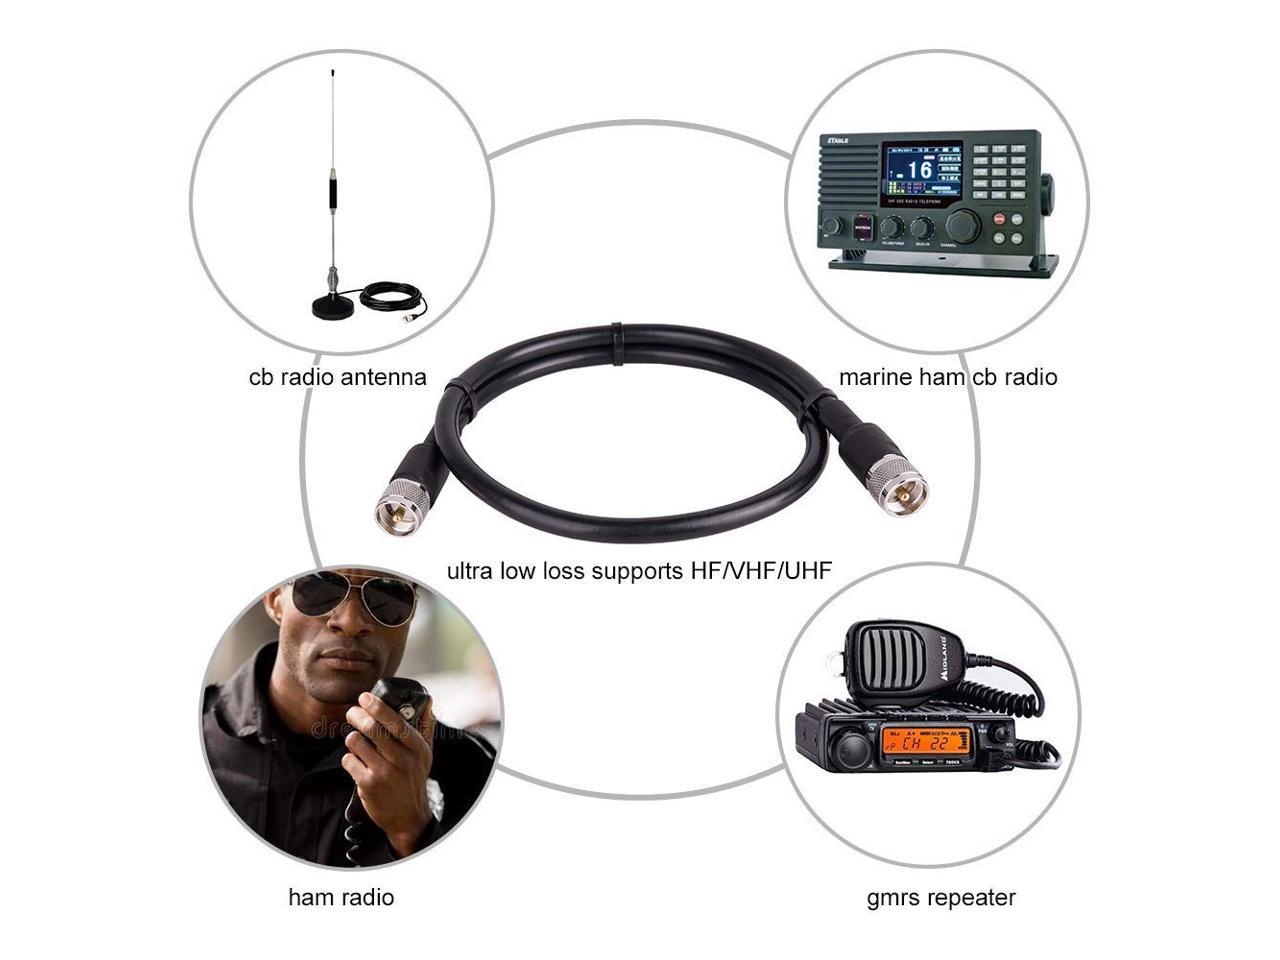 HAM & CB Radio VHF Marine Antenna SWR Meter KMR 400 UHF Coaxial Cable PL-259 UHF Male Coax Jumper Low Loss 50 ohm Cable for AIS Antenna Dummy Load XRDS-RF CB Coax Cable 50ft Antenna Analyzer 